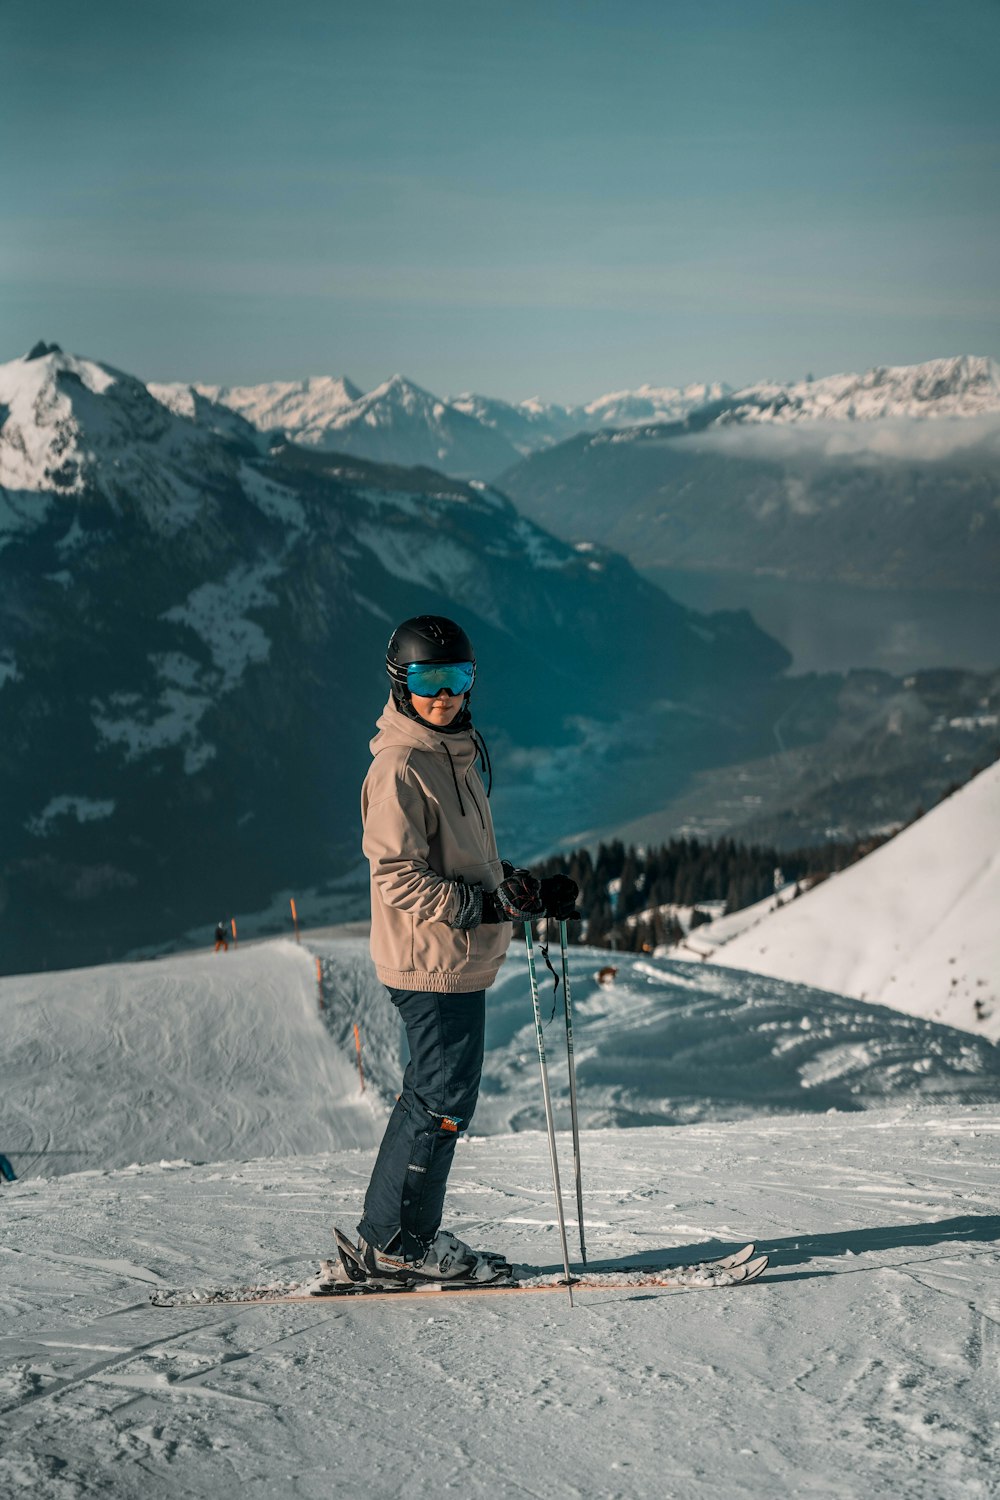 a person standing on skis on a snowy slope